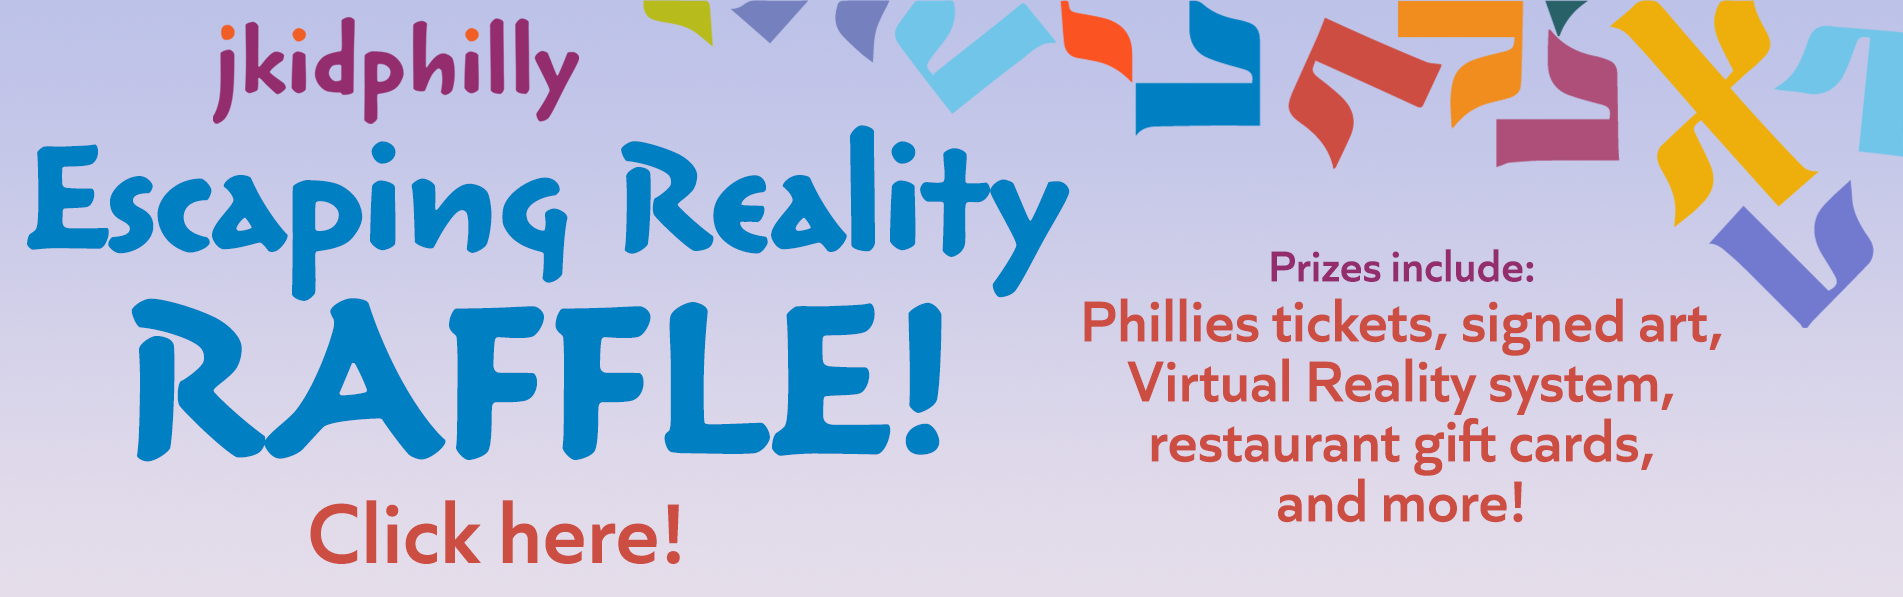 jkidphilly Escaping Reality Raffle! Click here! Prizes include: Phillies tickets, signed art, Virtual Reality system, restaurant gift cards, and more!